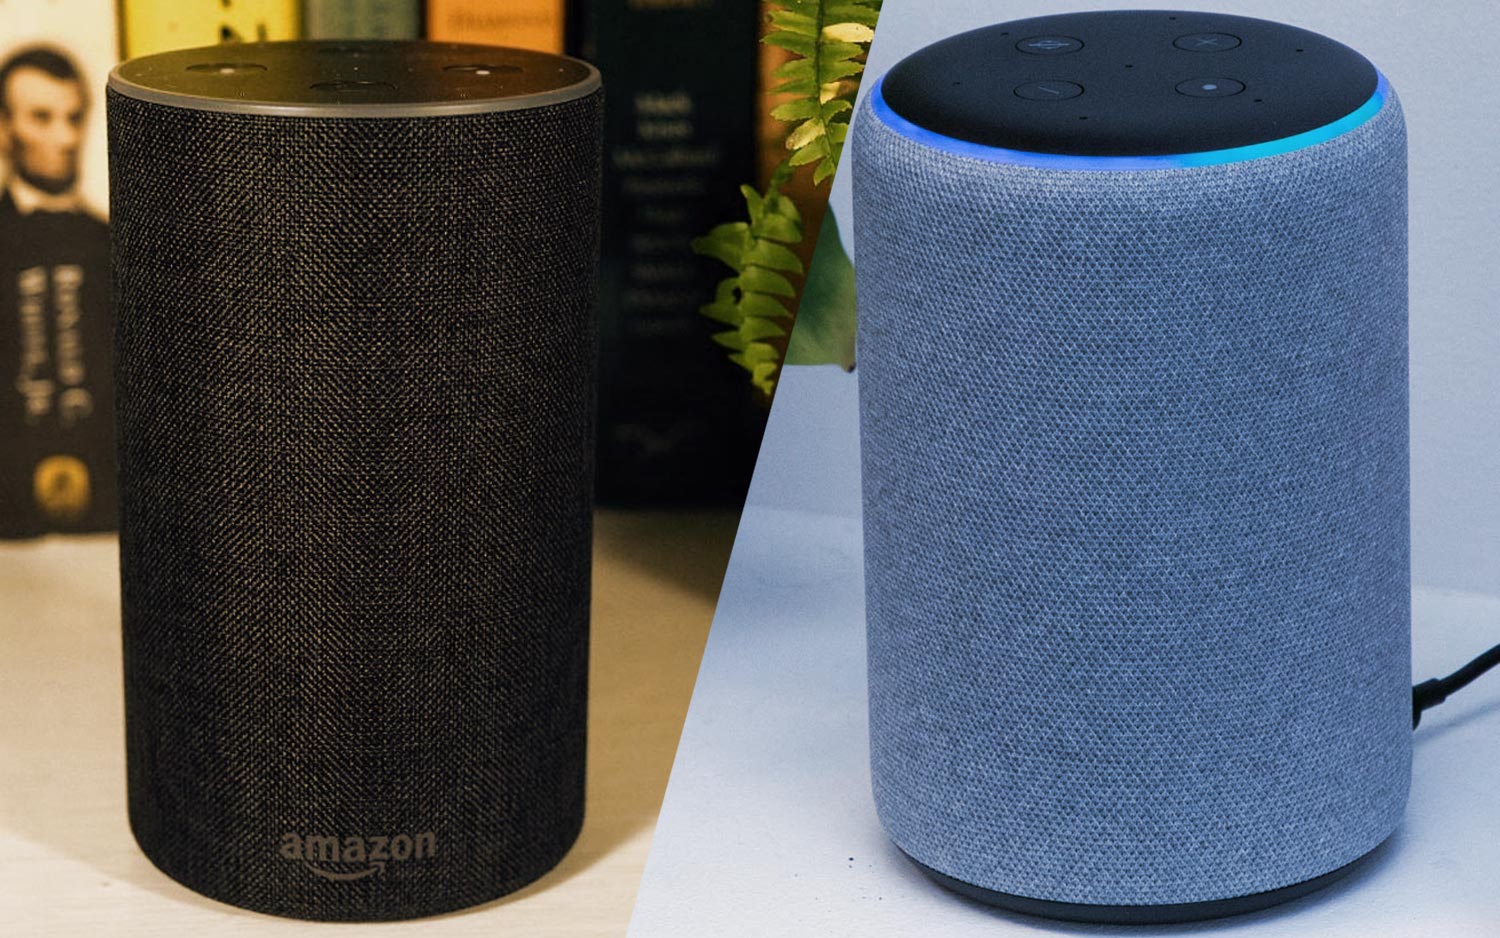 Echo (2nd generation) review: Better than the original, but